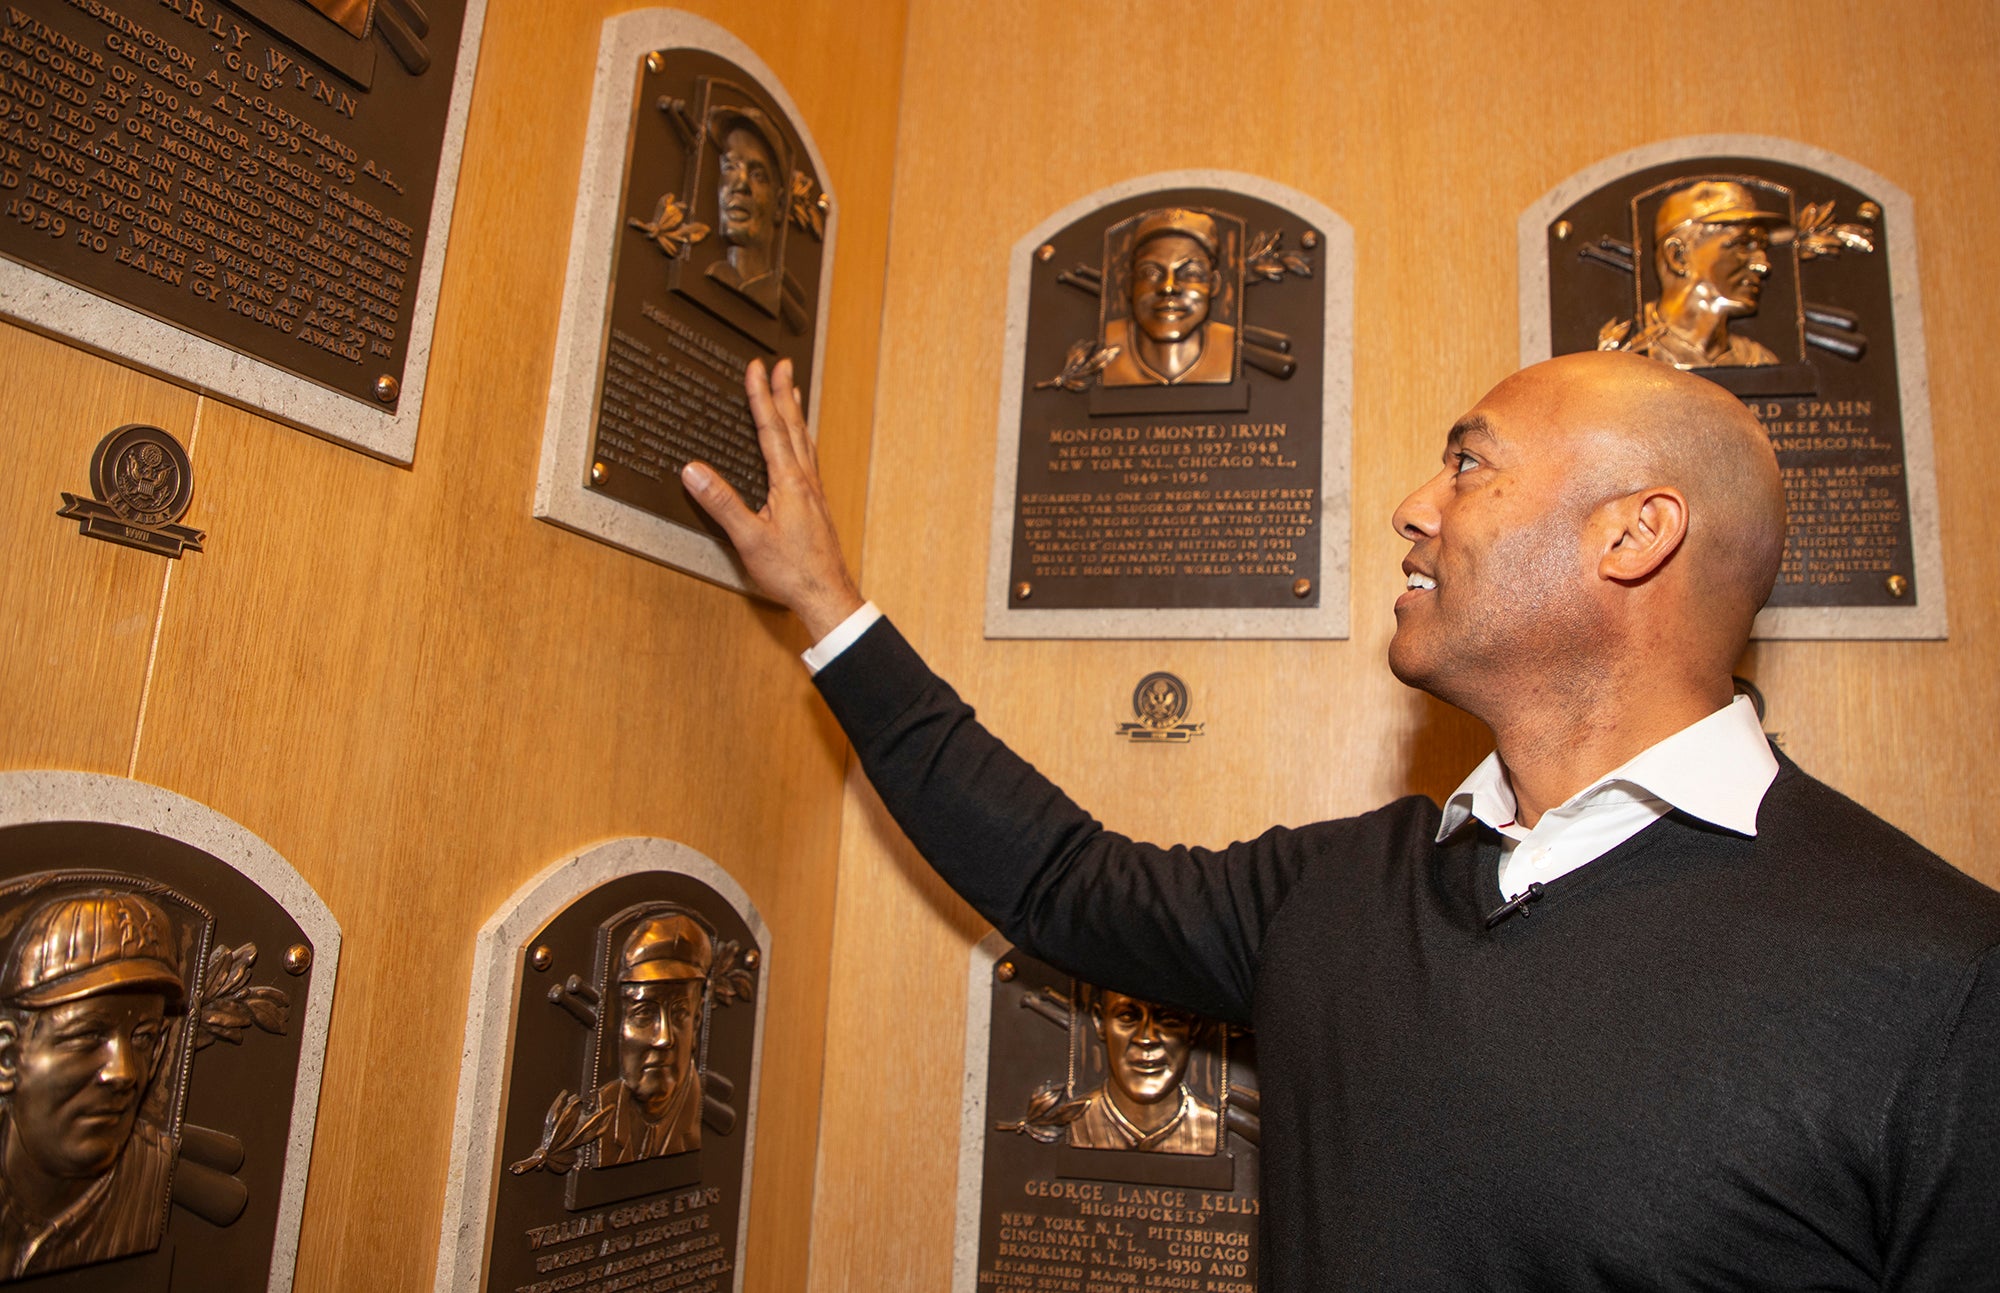 Rivera awed by Hall of Fame tour